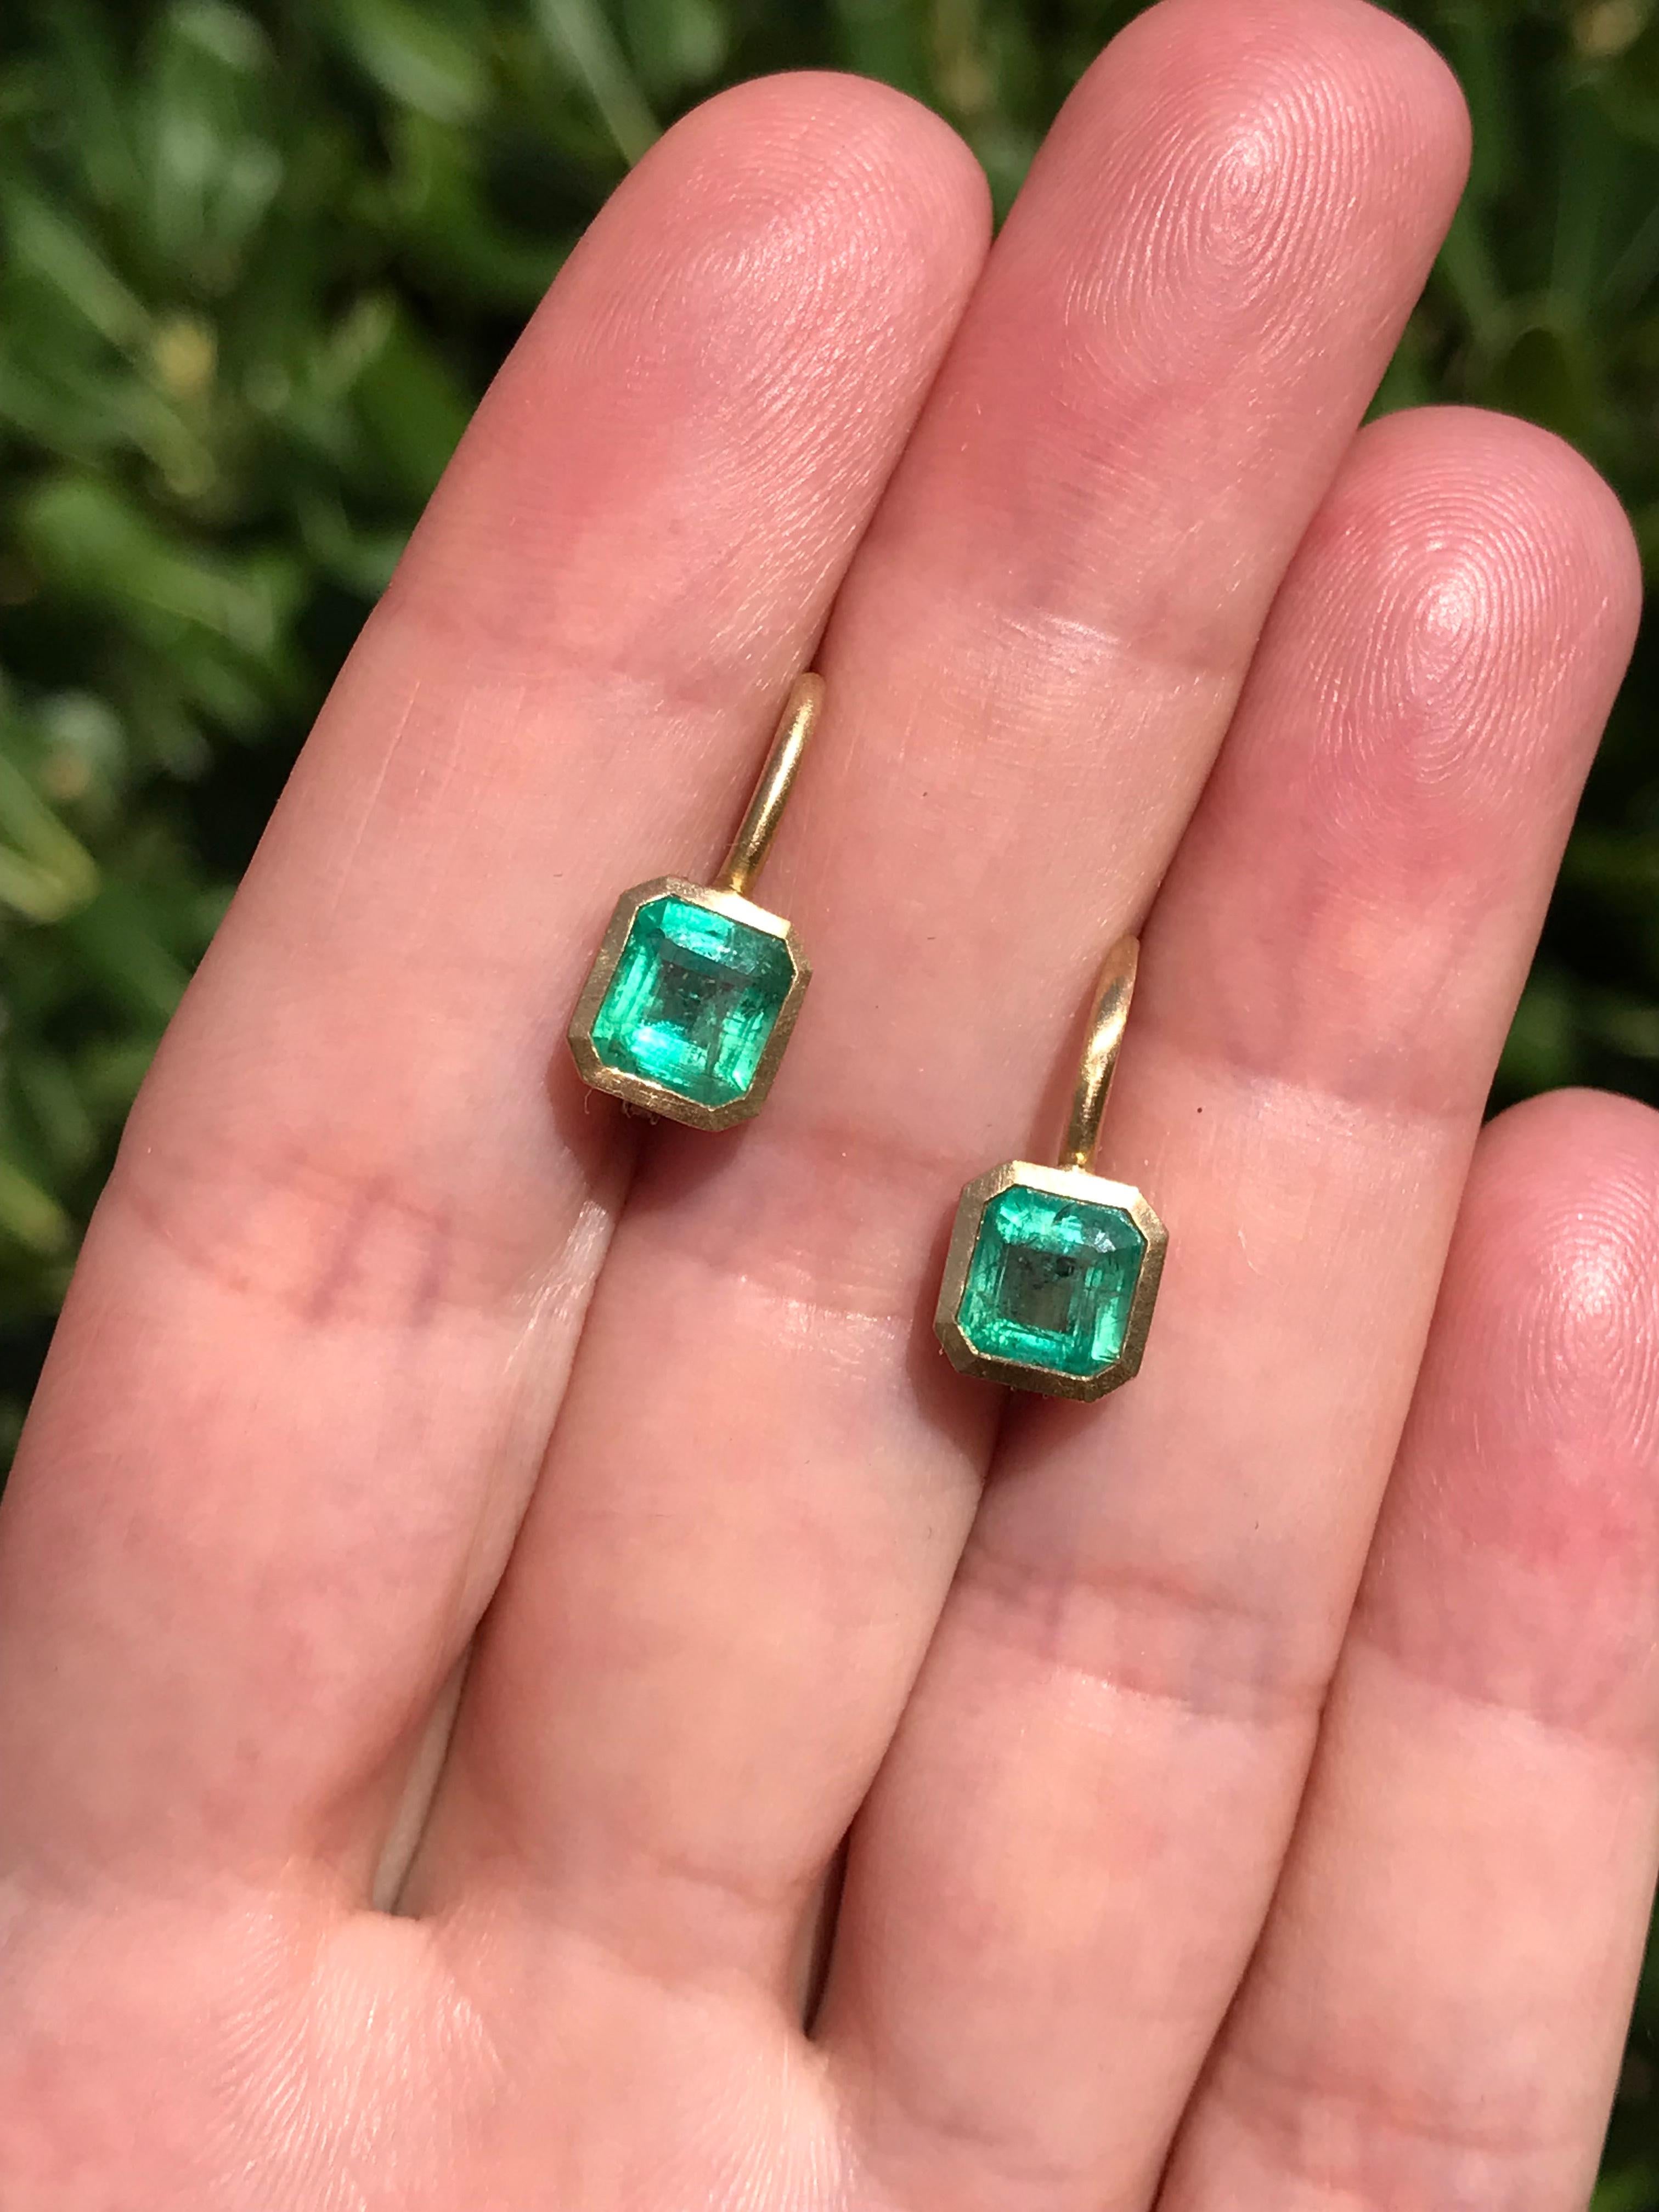 Dalben design  18k yellow gold satin finishing earrings with two bezel-set emerald faceted cut  emerald weight 2,69 carats .
Bezel stone dimensions :
 7,9 x 7,3 mm  7,8 x 7,4 mm
height with leverback 16,7 mm
The earrings has been designed and